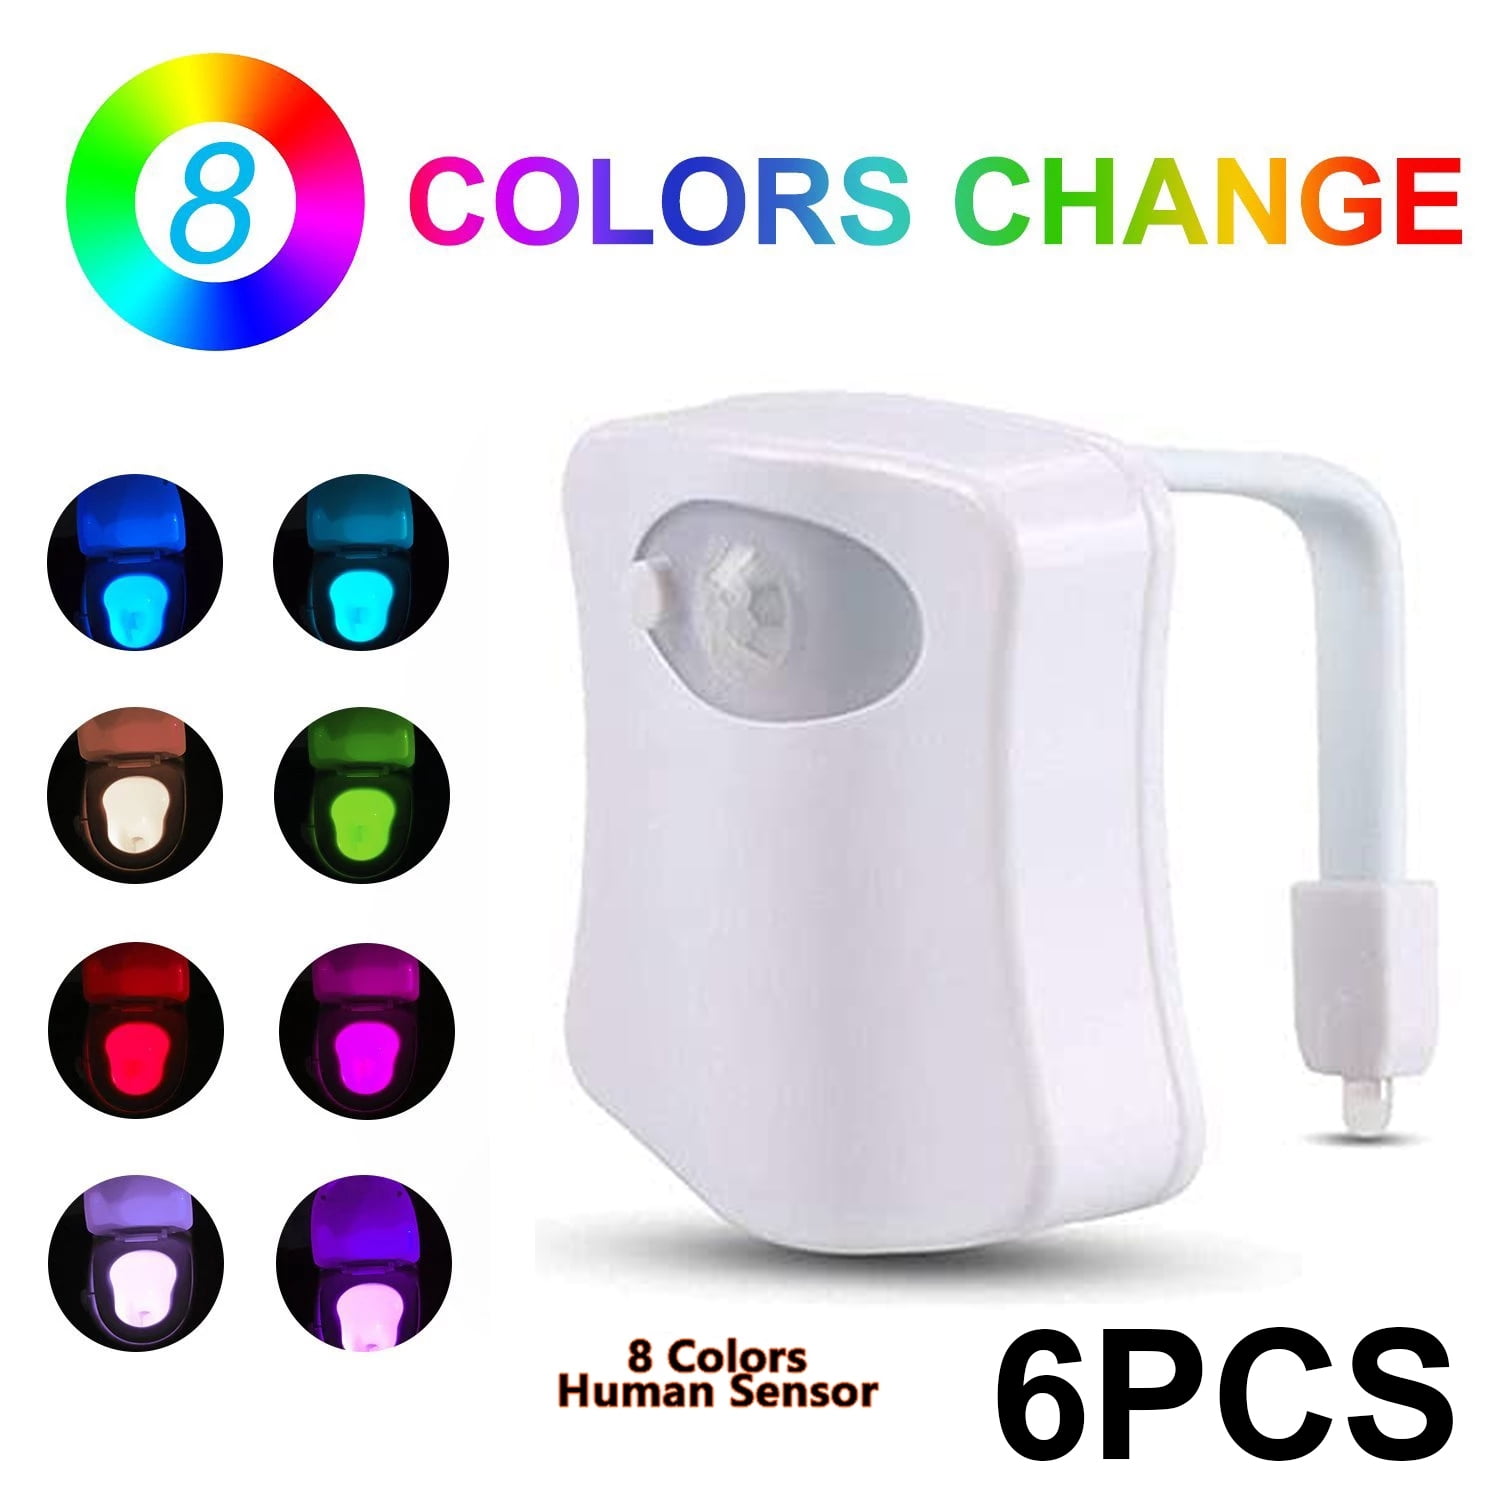 8 Colour motion activated  sterilizing LED Toilet Bowl Glow lights with UV Lamp. 